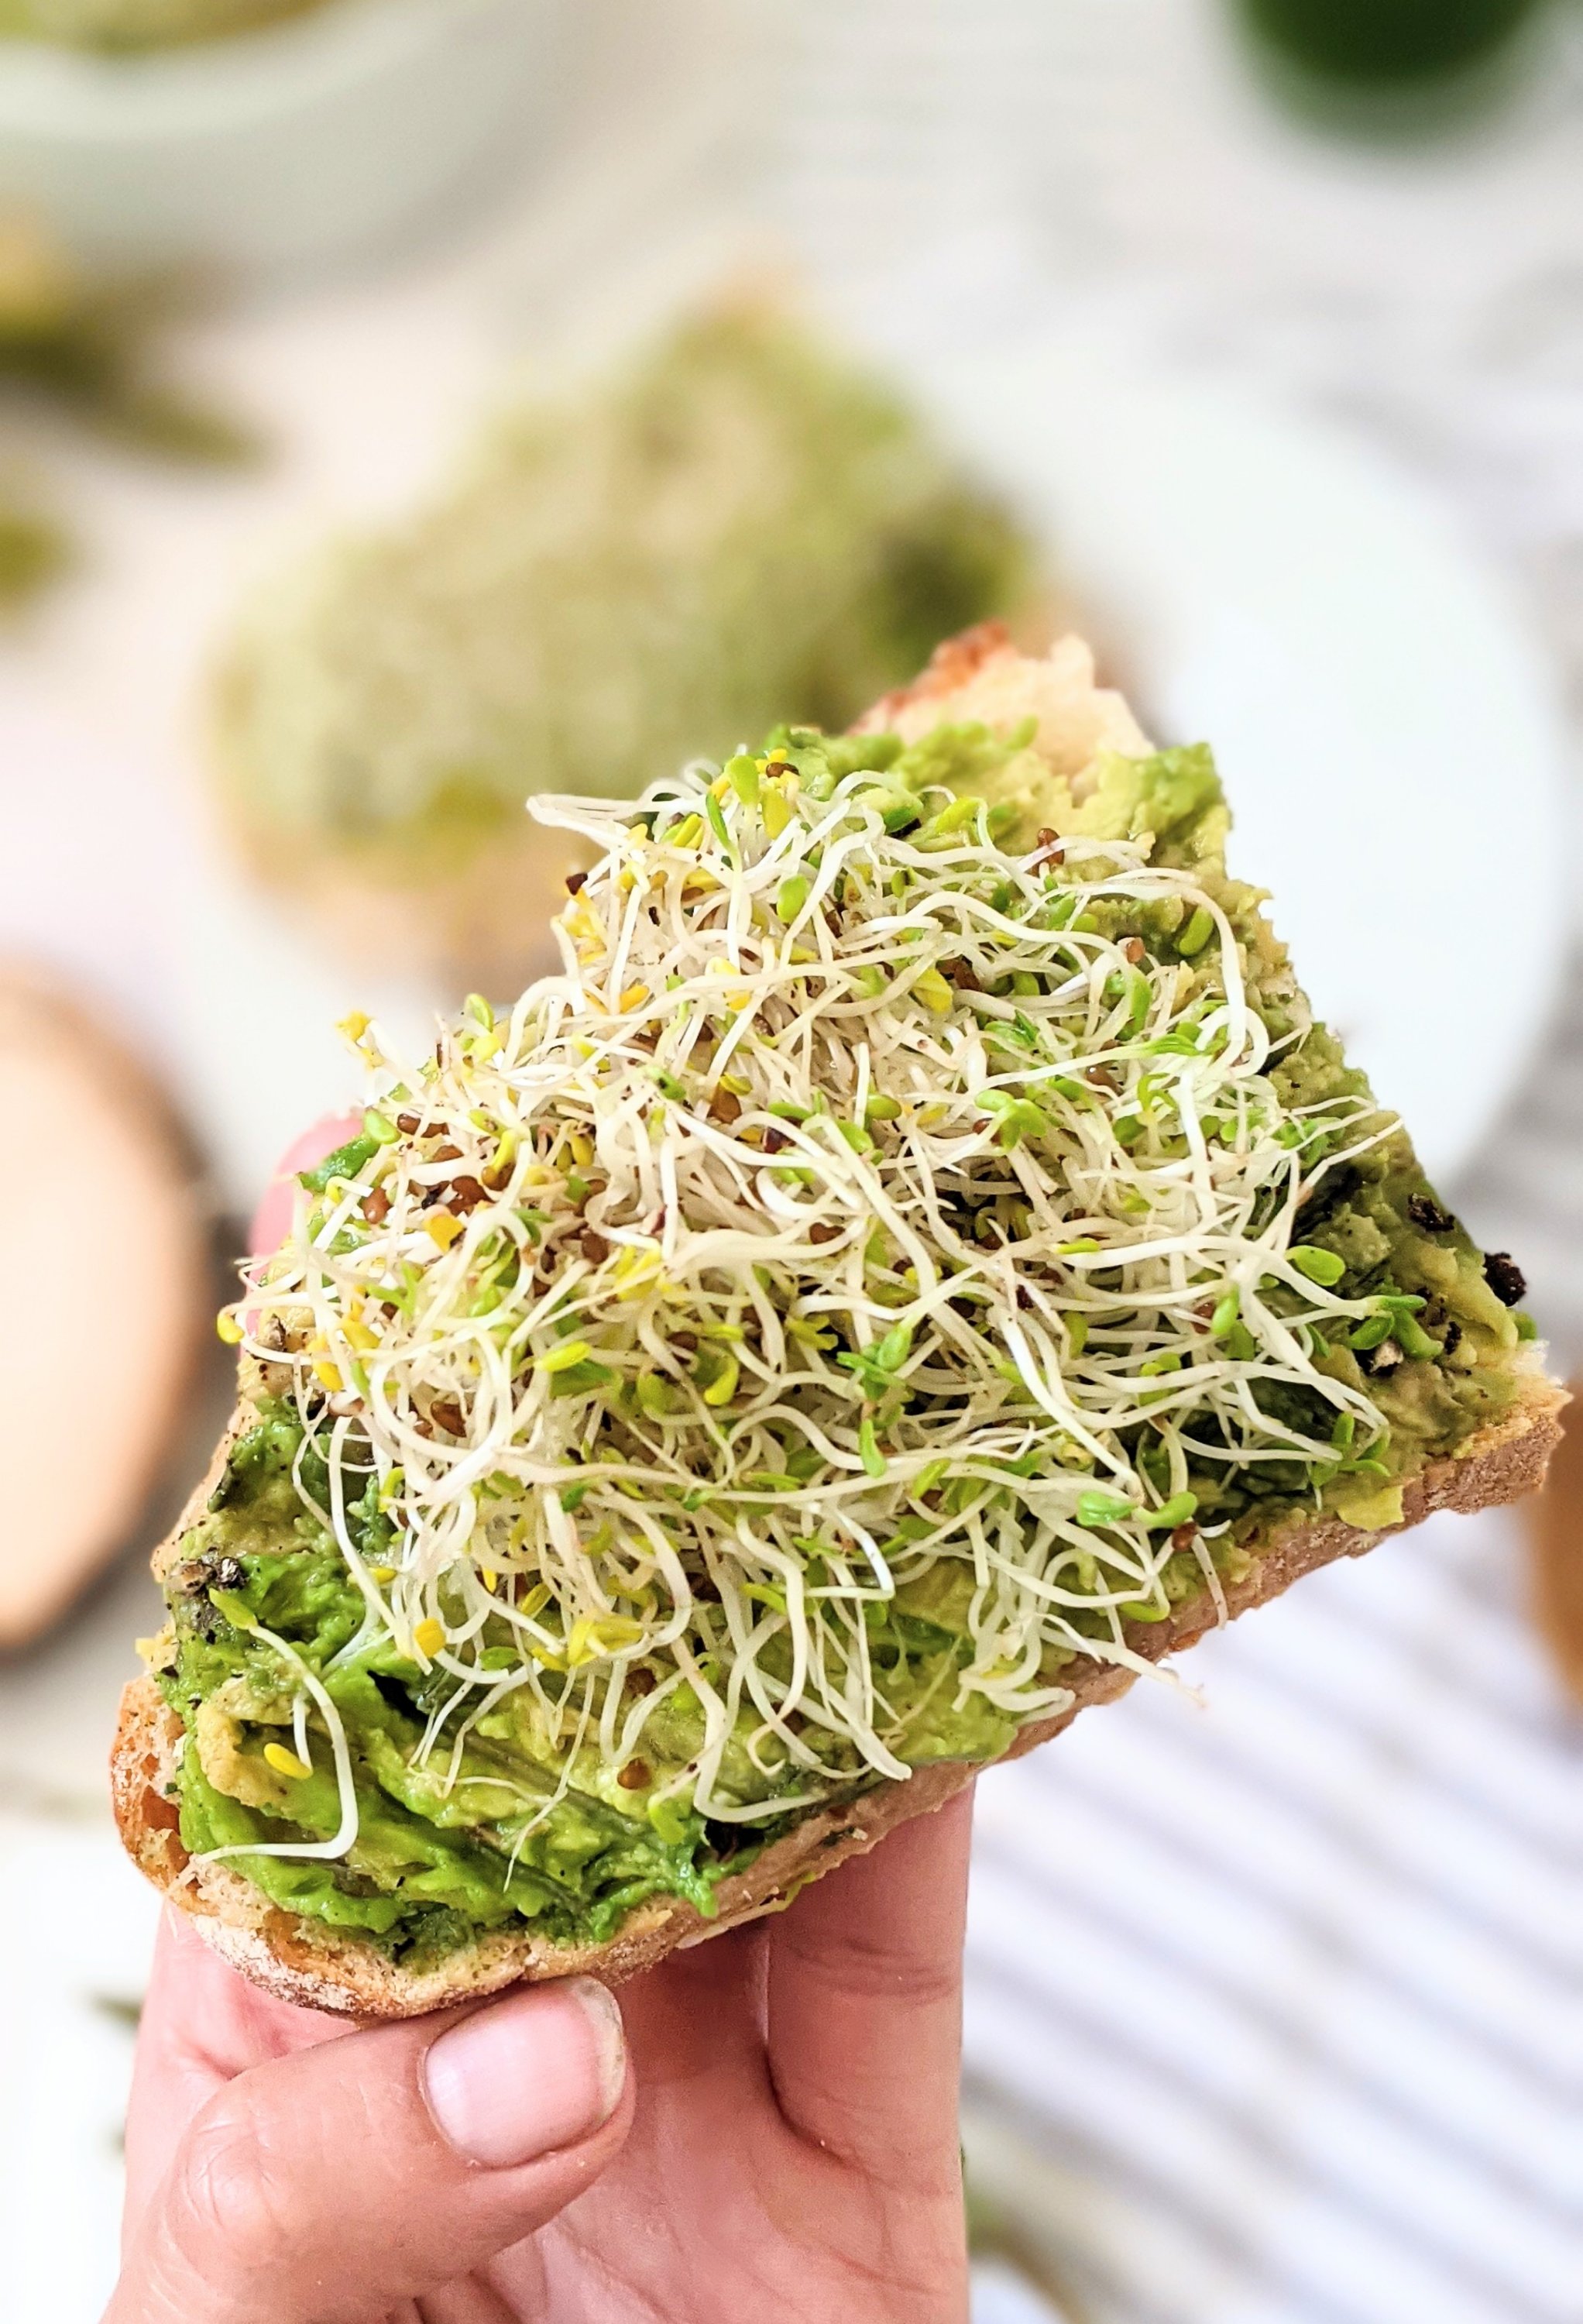 alfalfa avocado toast with sprouts recipes for breakfast avocado with lemon juice garlic and steak spice and chili flakes topped with home grown alfalfa sprouts easy recipes